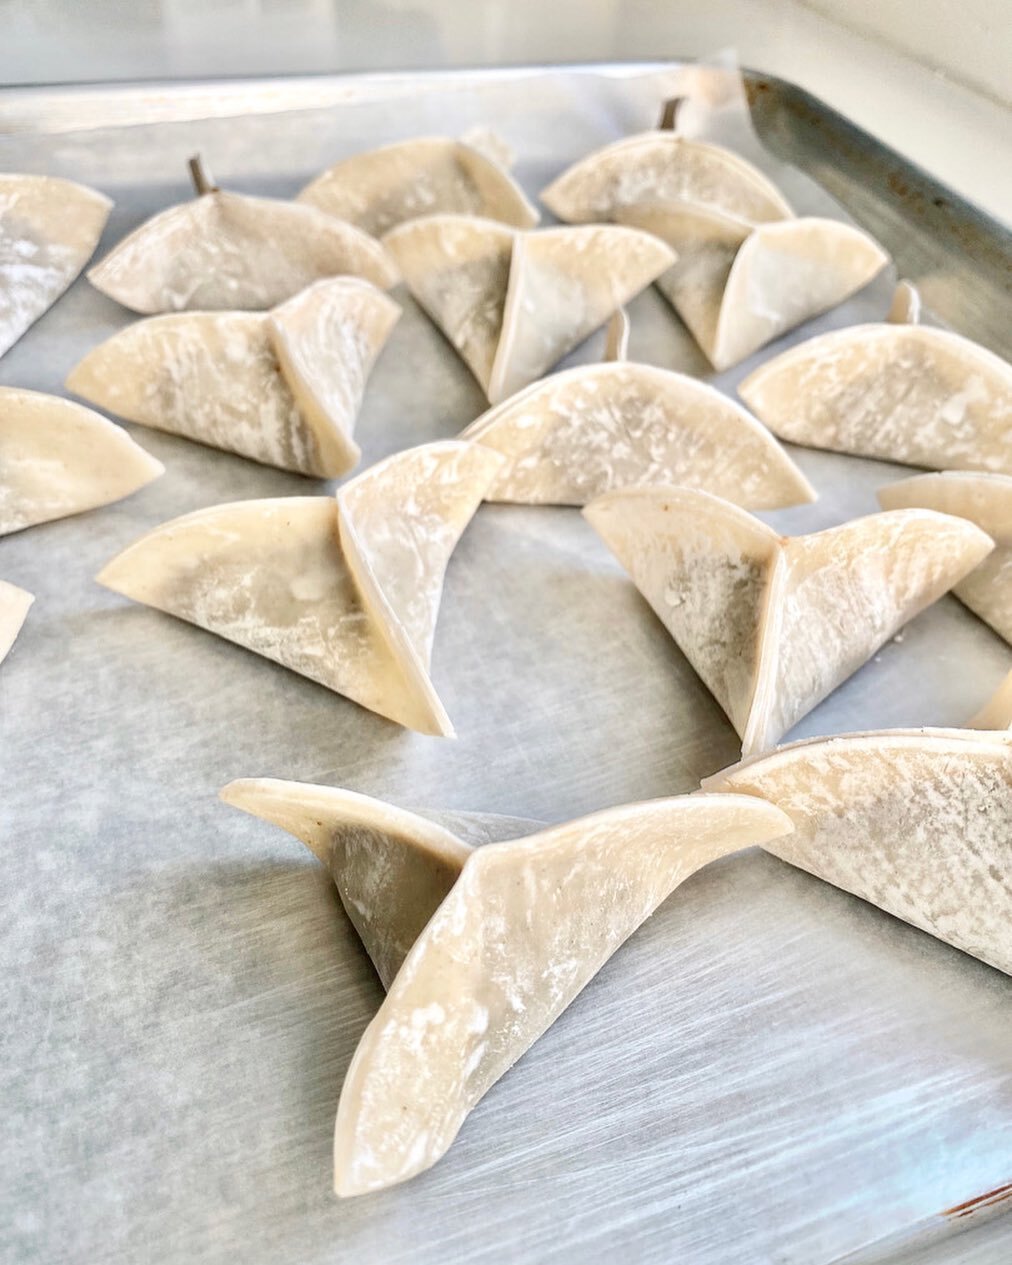 Paper-Plane dumplings again my go-to shape because it&rsquo;s super easy to make a lot of them fast, they are an easy shape to sear with the flat bottom that offers surface area to get all crispy, and it&rsquo;s easy to grab the little wings pulling 